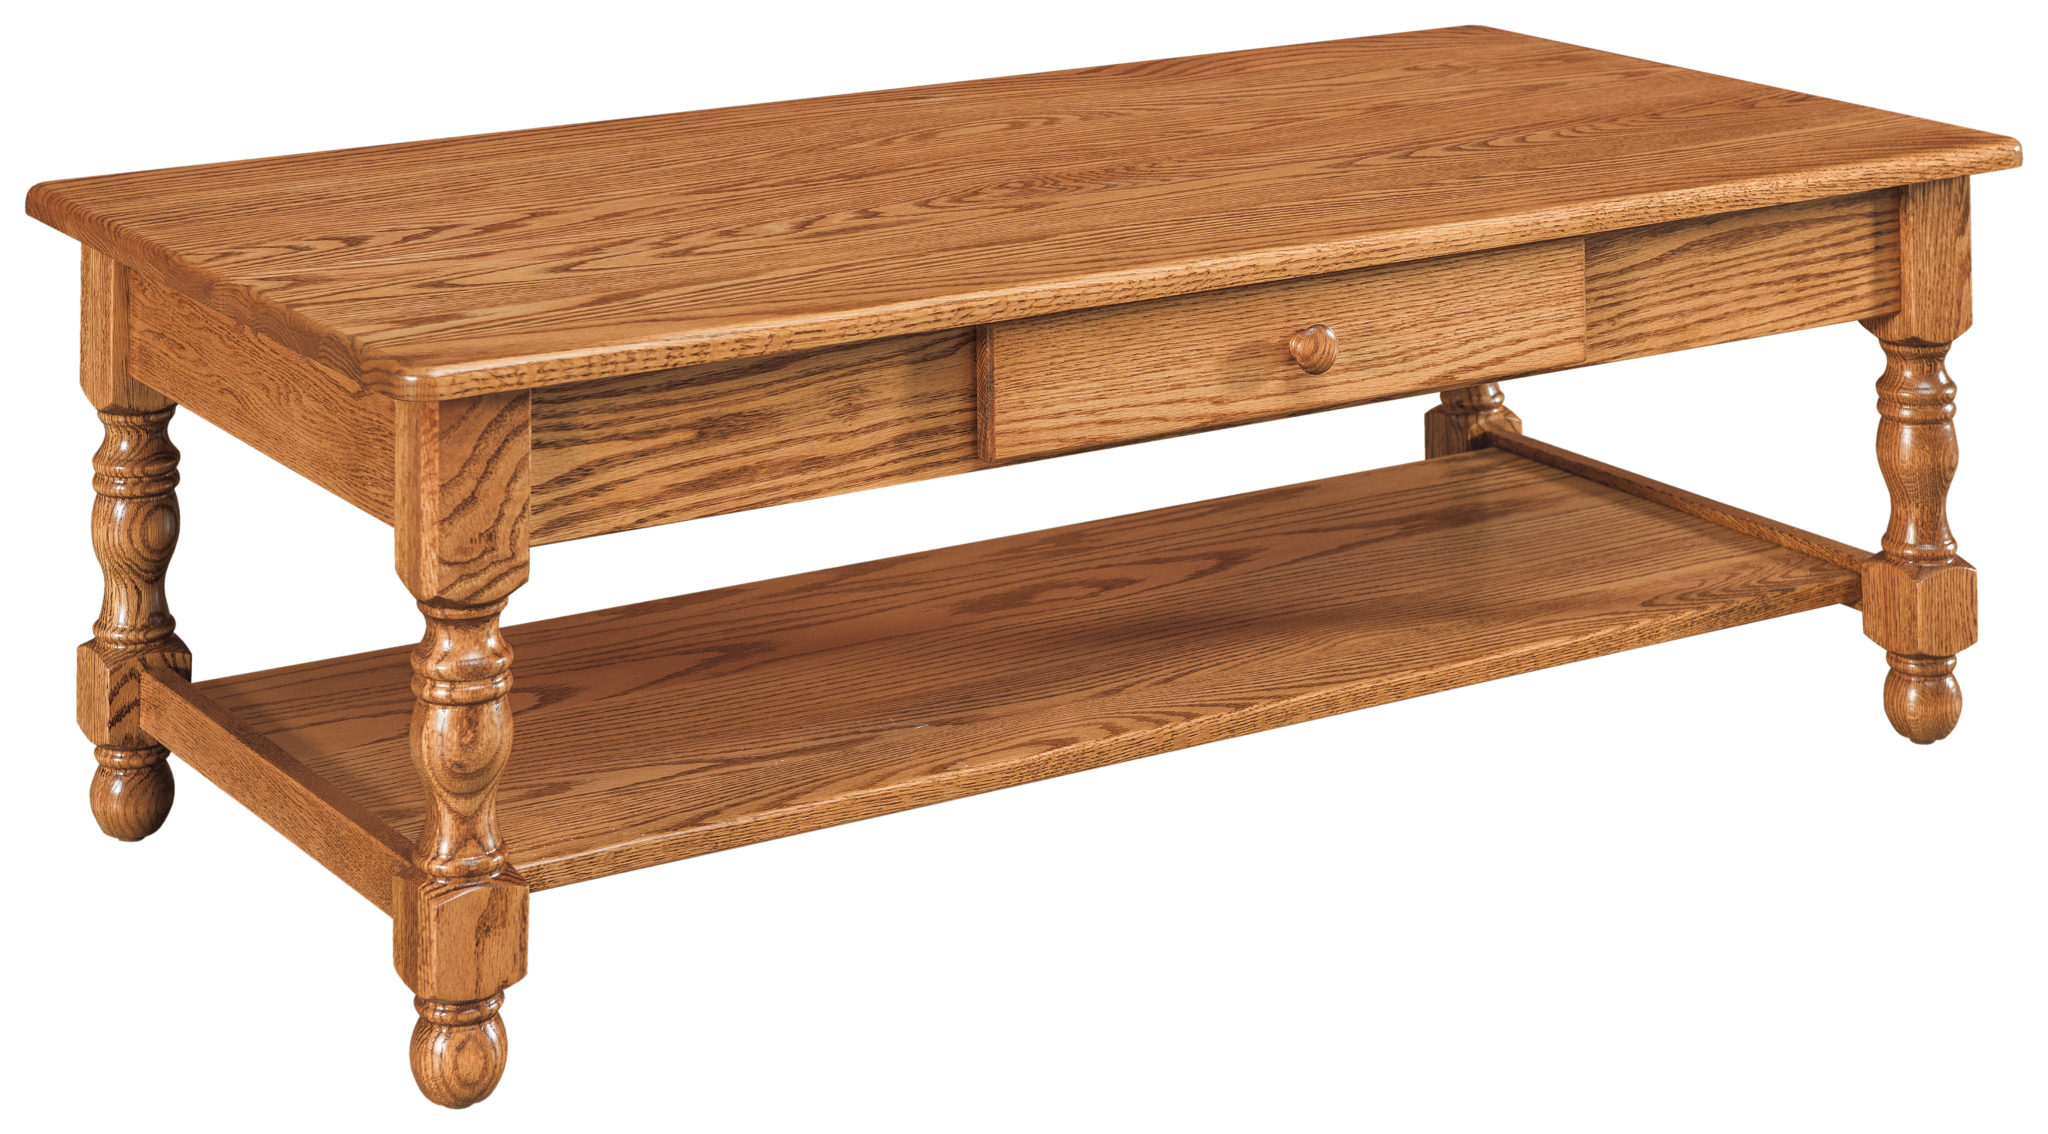 Country CoffeeTable 2048x1134 